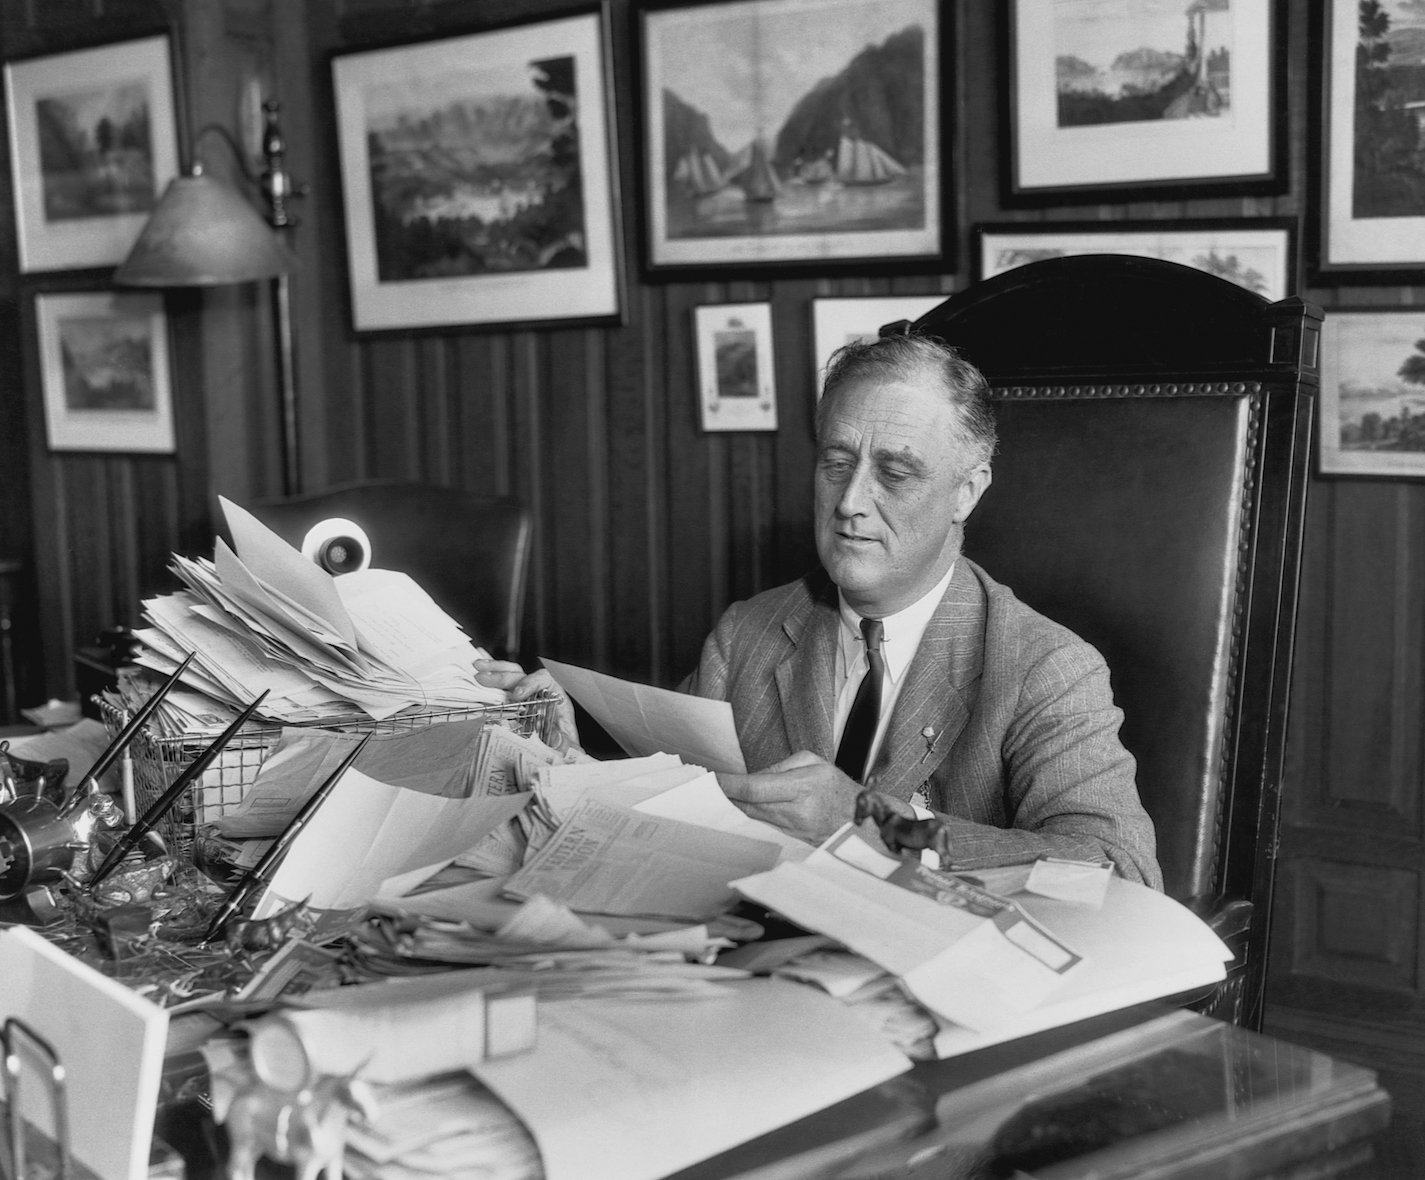 A black and white photo of president Franklin D. Roosevelt in 1932 sitting at a desk piled high with letters after the election